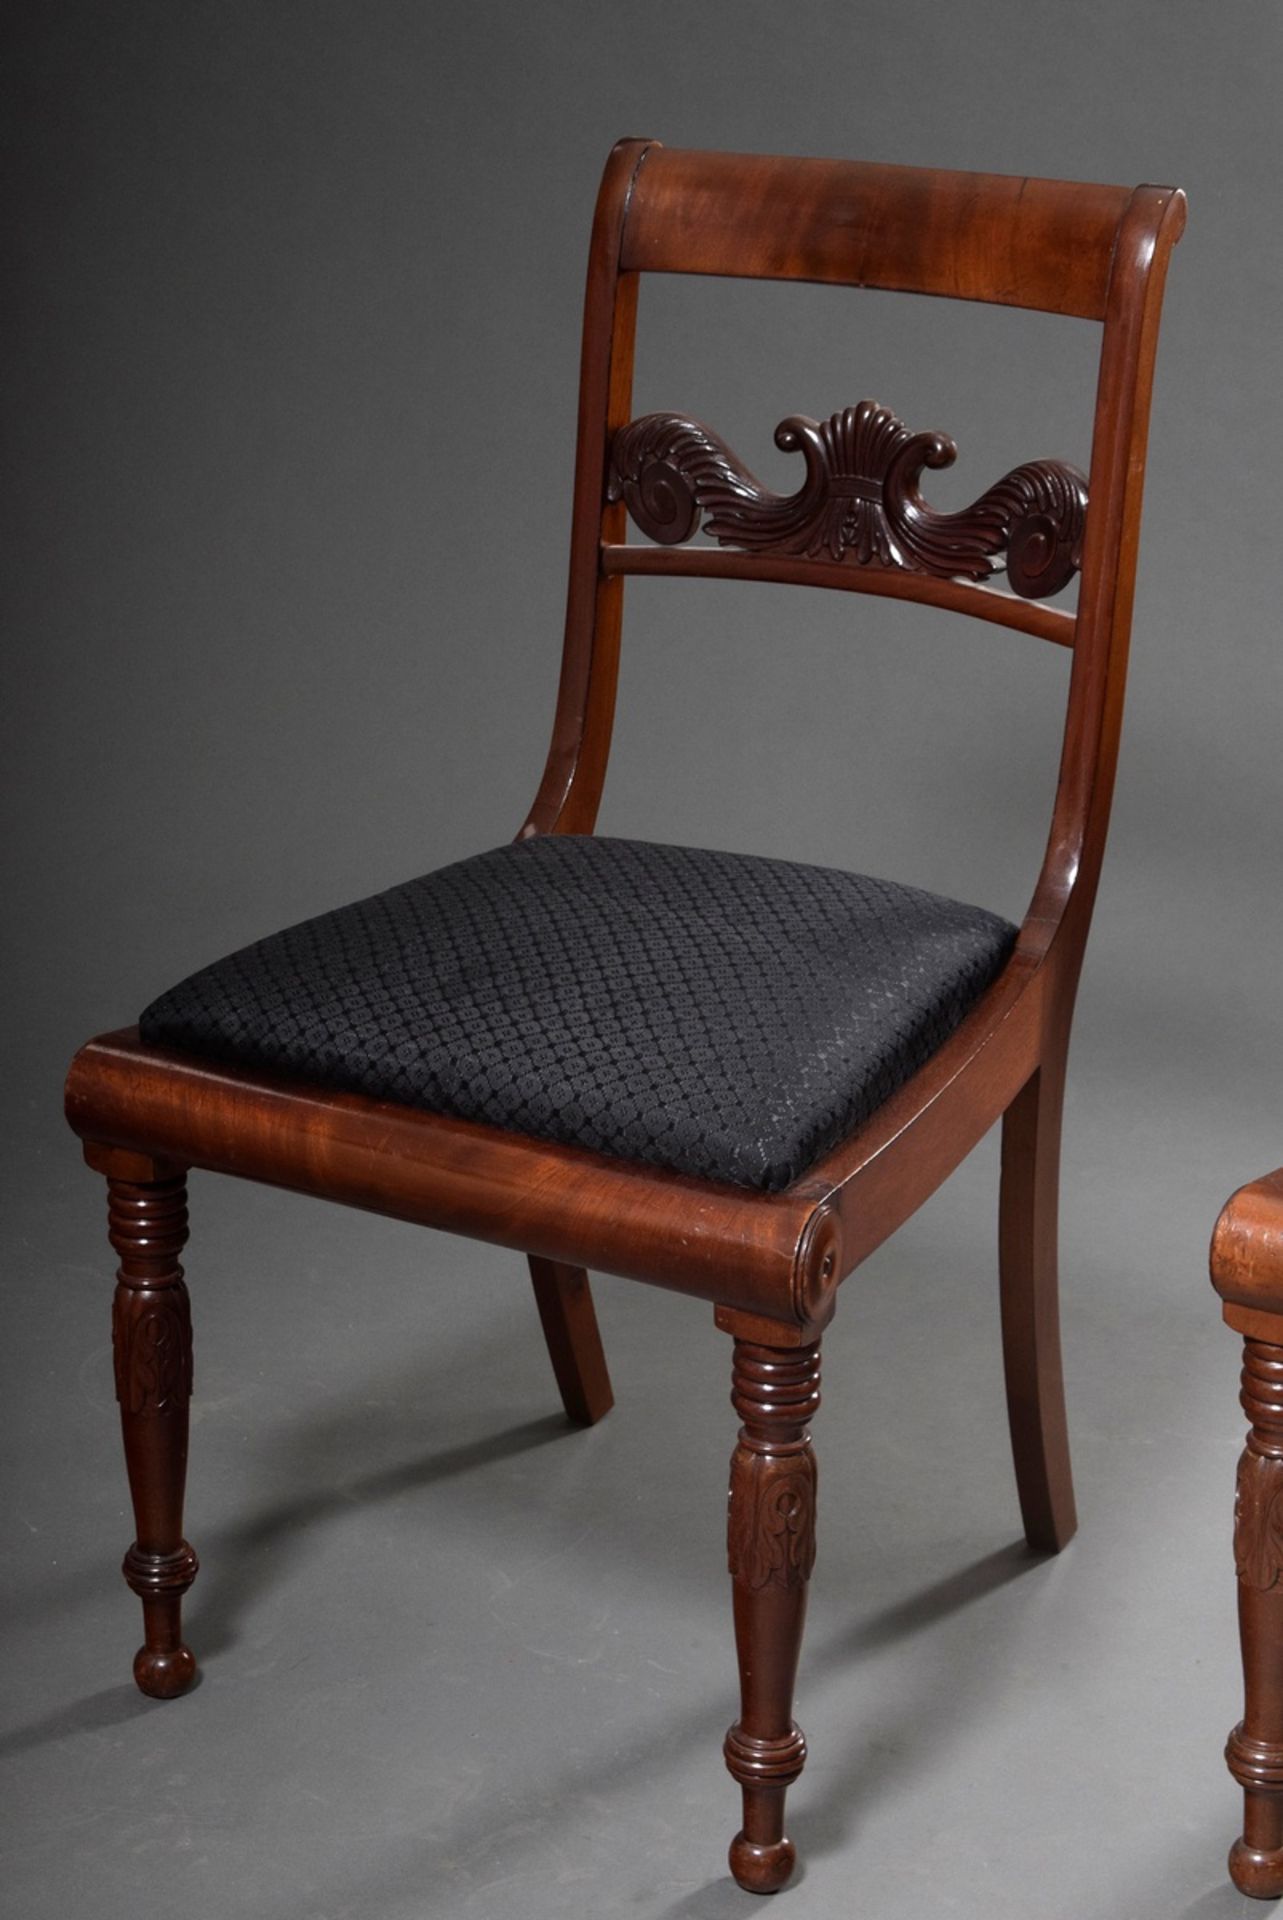 Pair of Biedermeier chairs with floral carved back board, turned legs and horsehair upholstery, mah - Image 4 of 6